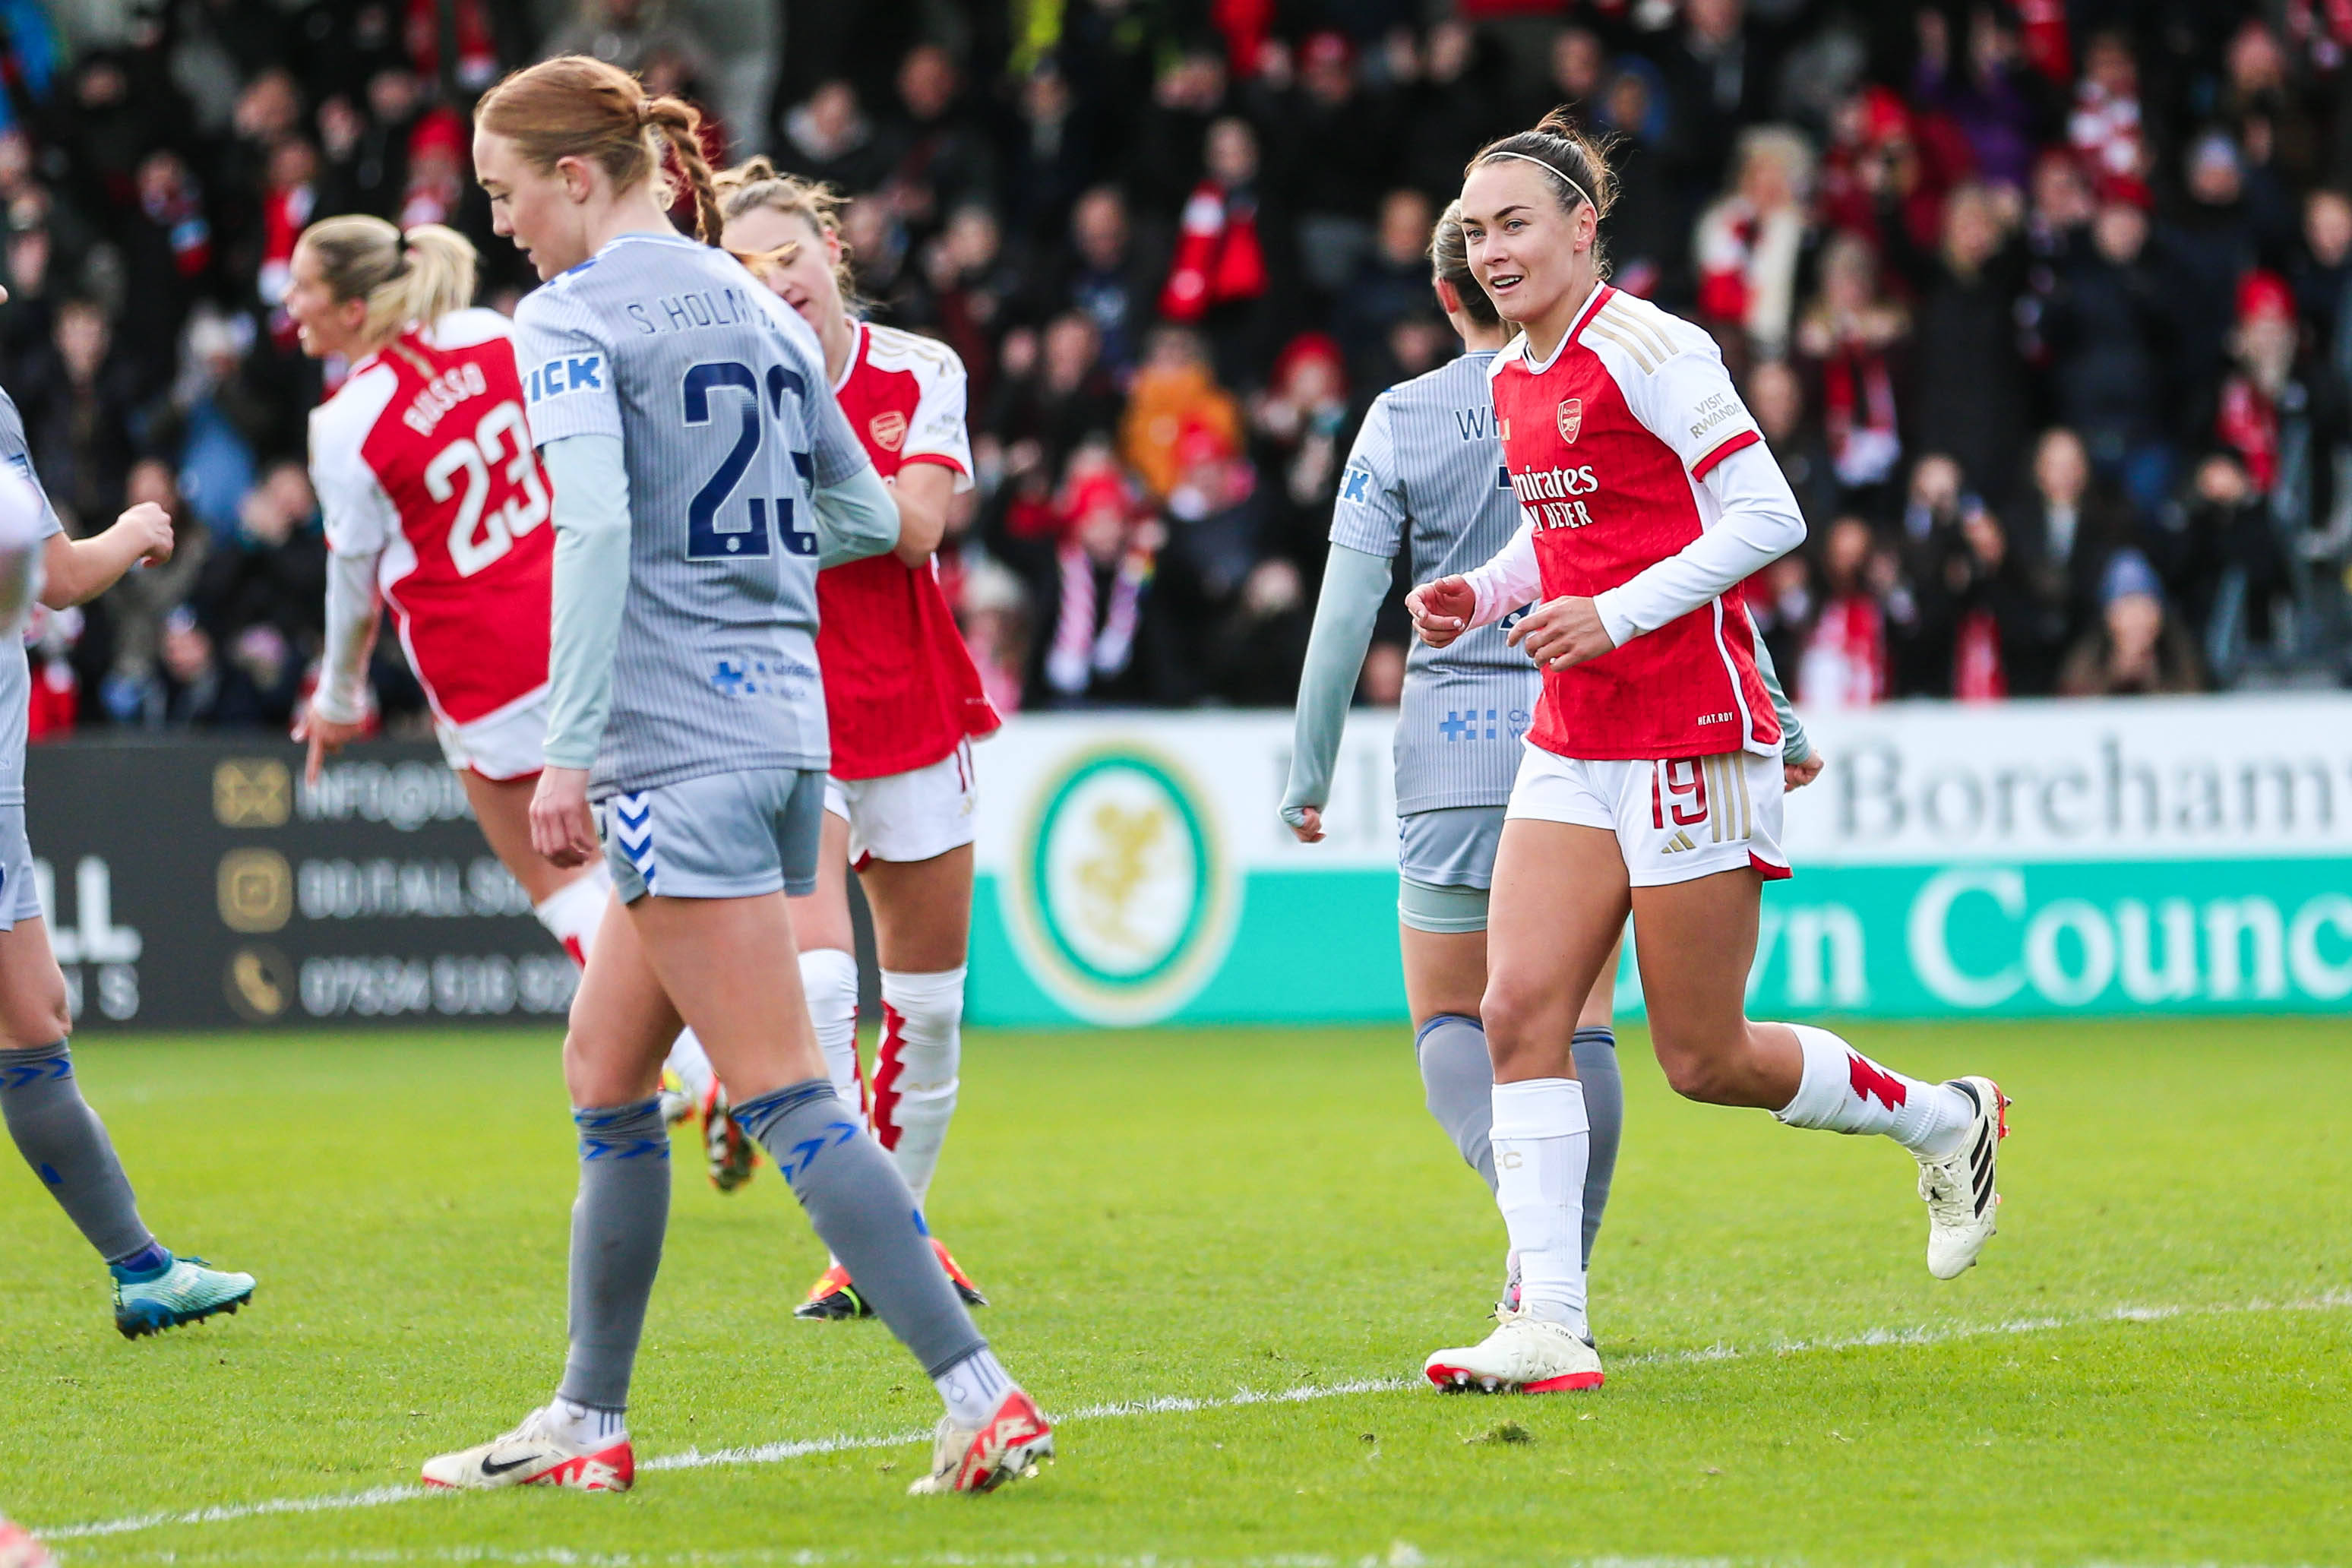 Caitlin Foord celebrates scoring her side’s first goal of the game during the Barclays Women’s Super League match at the Mangata Pay UK Stadium, Borehamwood. (Photo: Rhianna Chadwick via Imago)